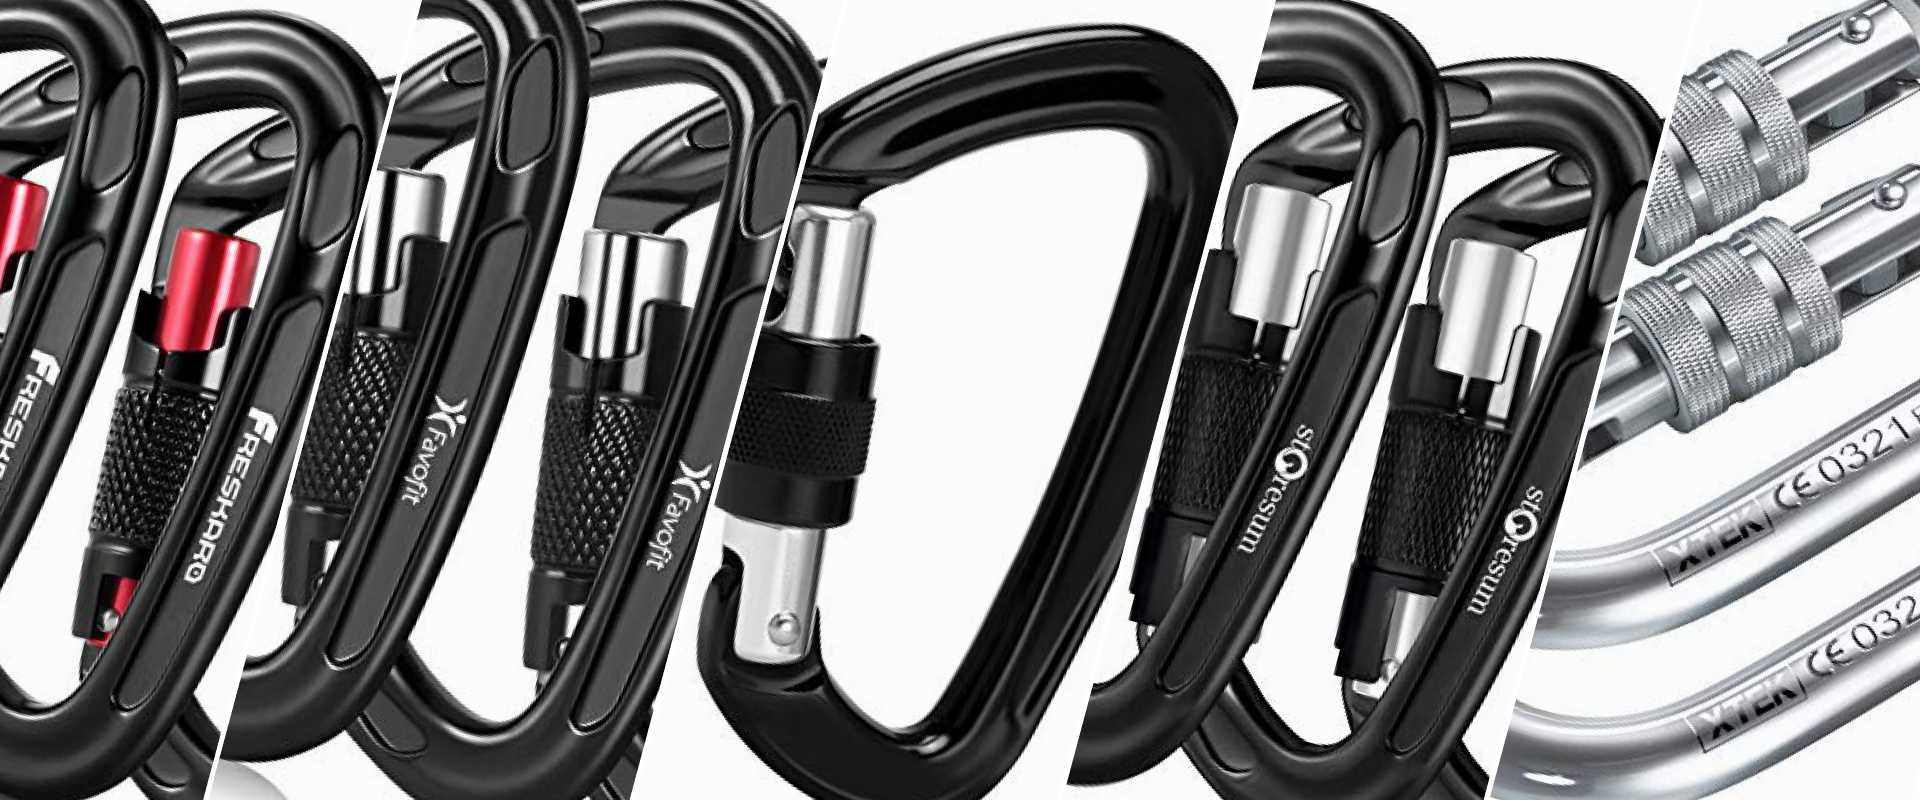 2 or 4 Pack Heavy Duty Rated 5000 LBS Each Aluminium Wiregate Lightweight Carabiners Clips for Hammock Camping Accessories Vishusju 24KN Rock Climbing Carabiners